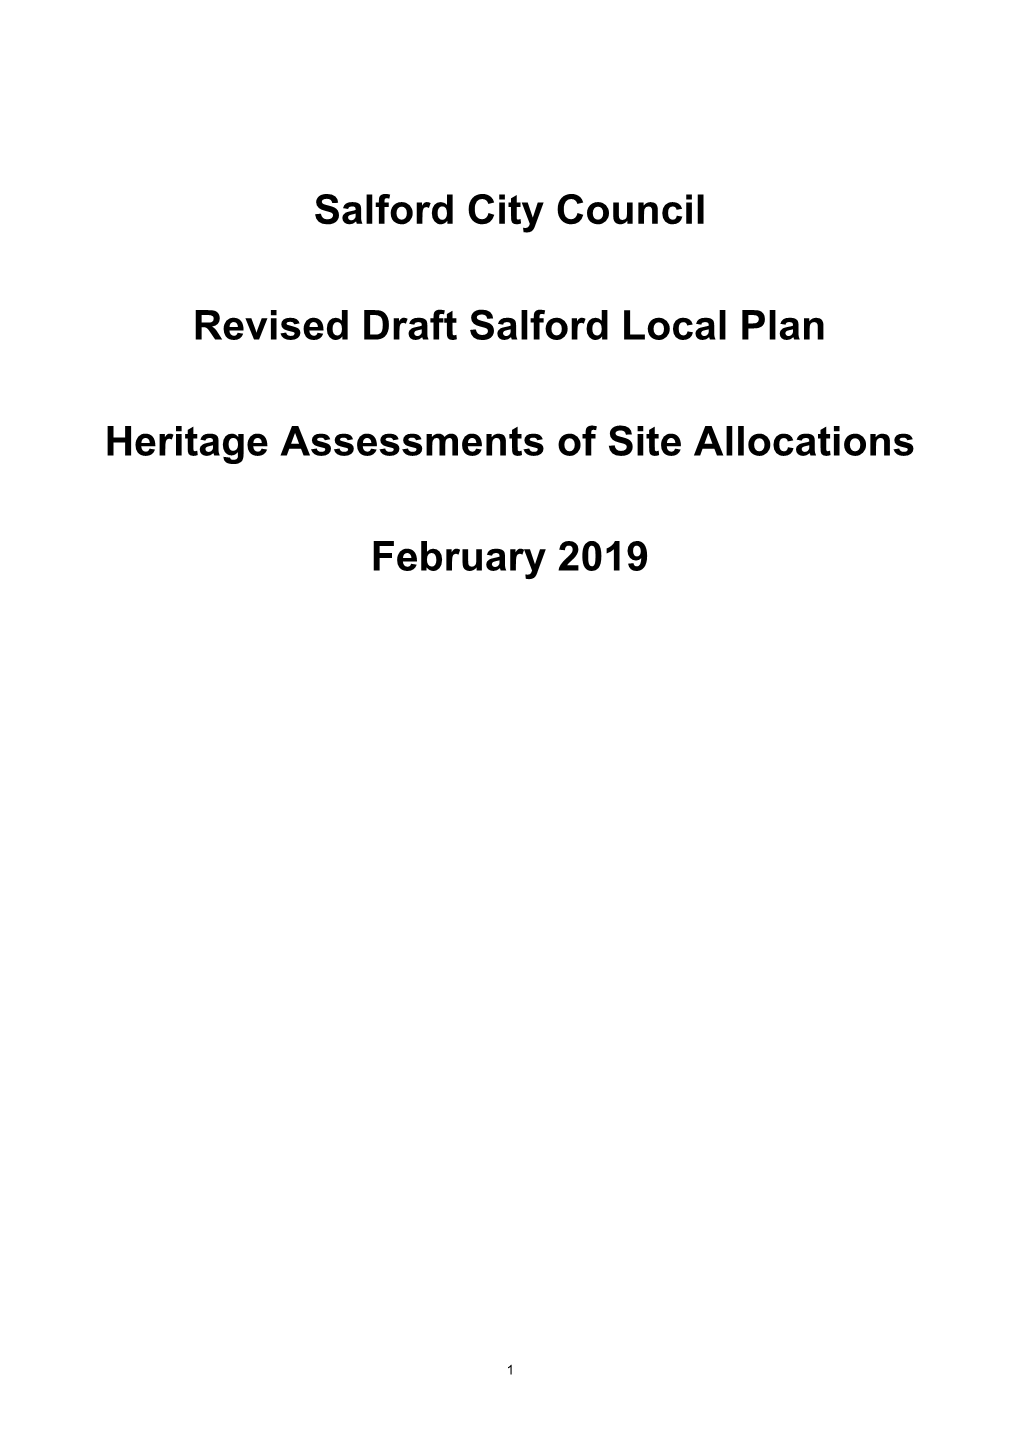 Salford City Council Revised Draft Salford Local Plan Heritage